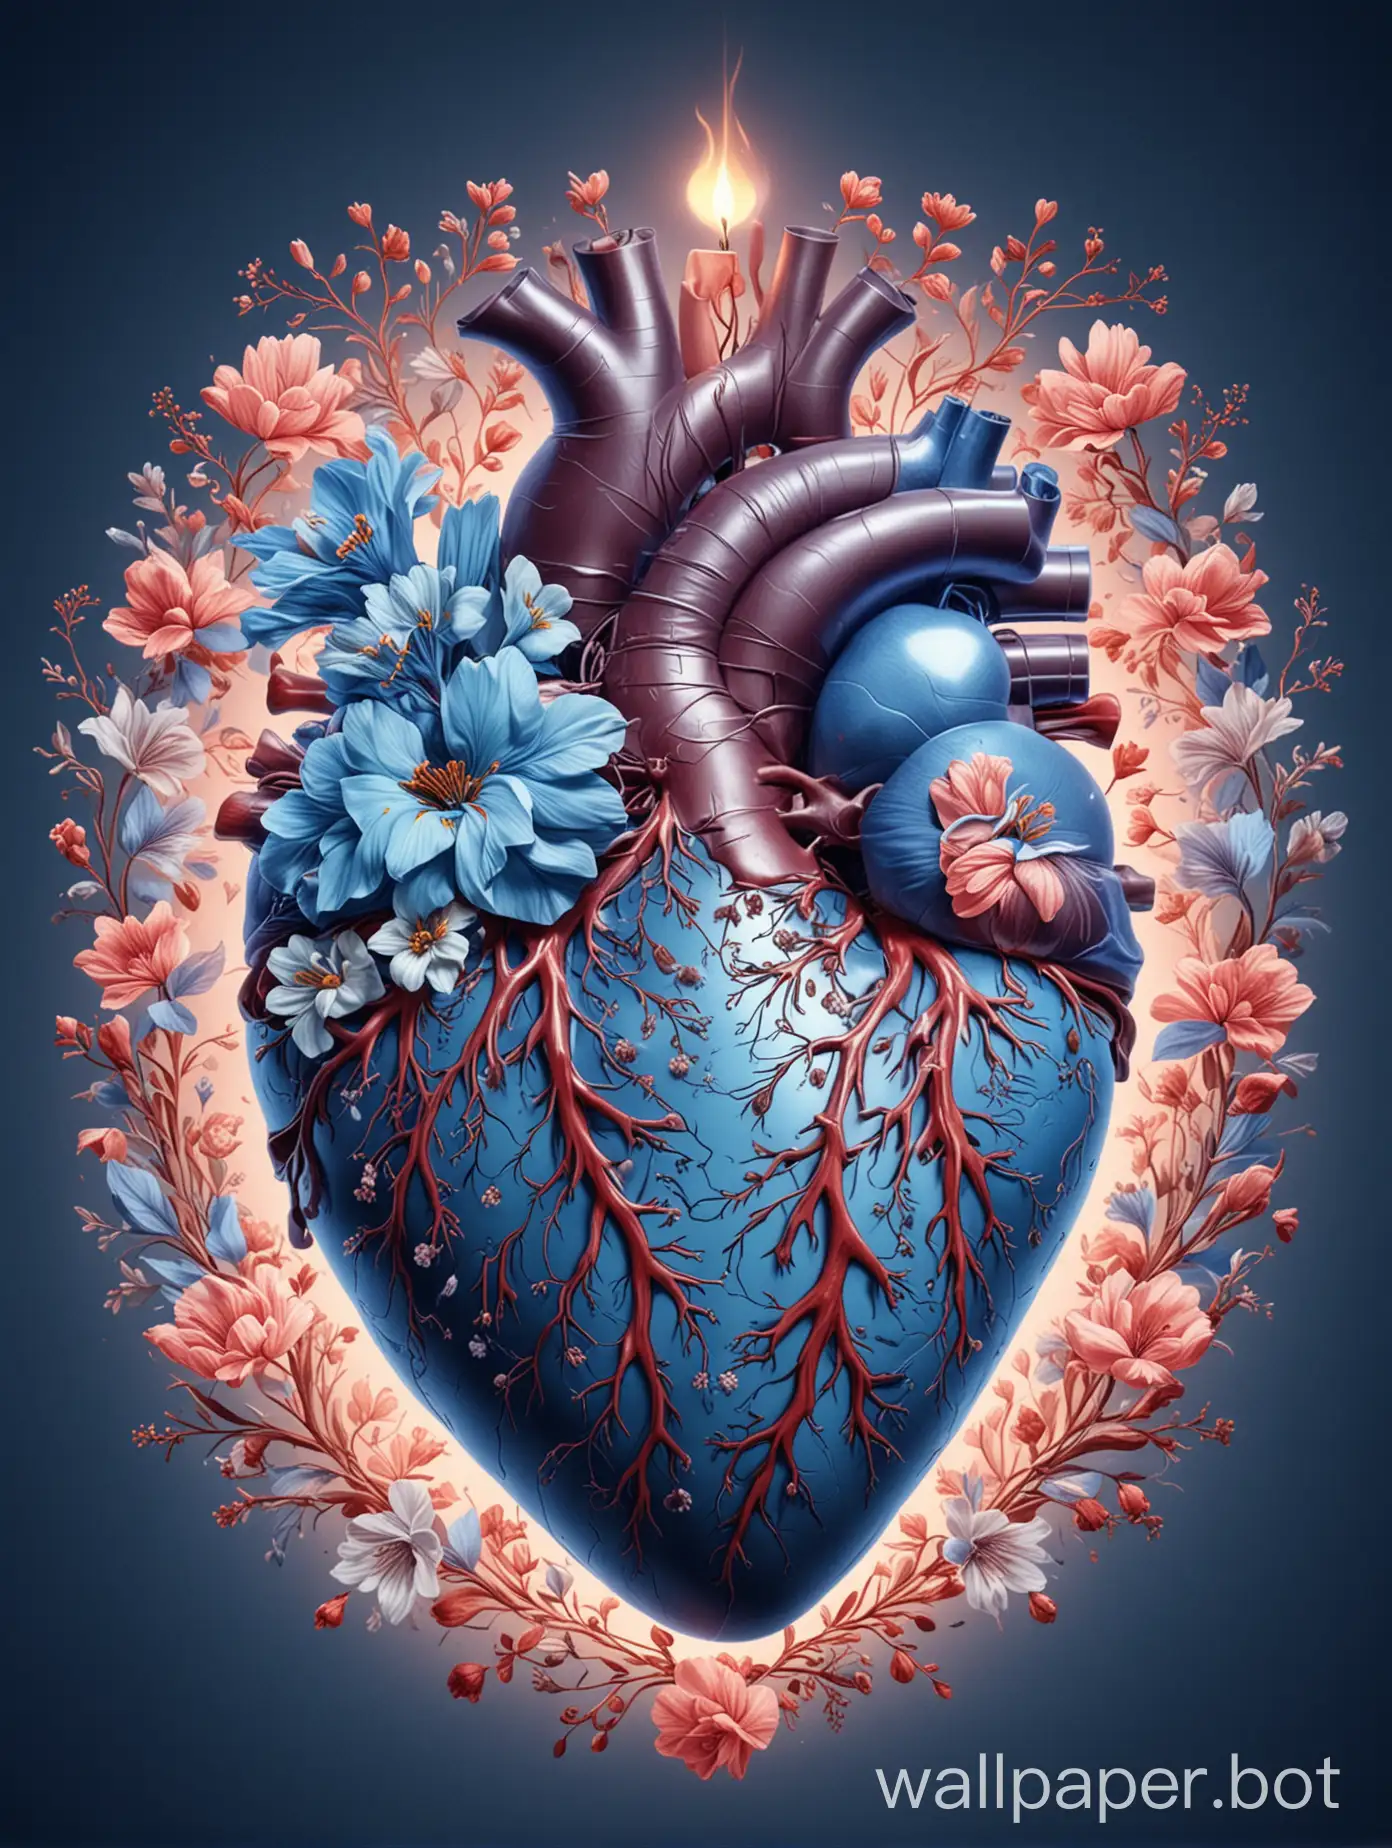 Glowing-Floral-Anatomical-Heart-Medicine-in-MidBlue-Light